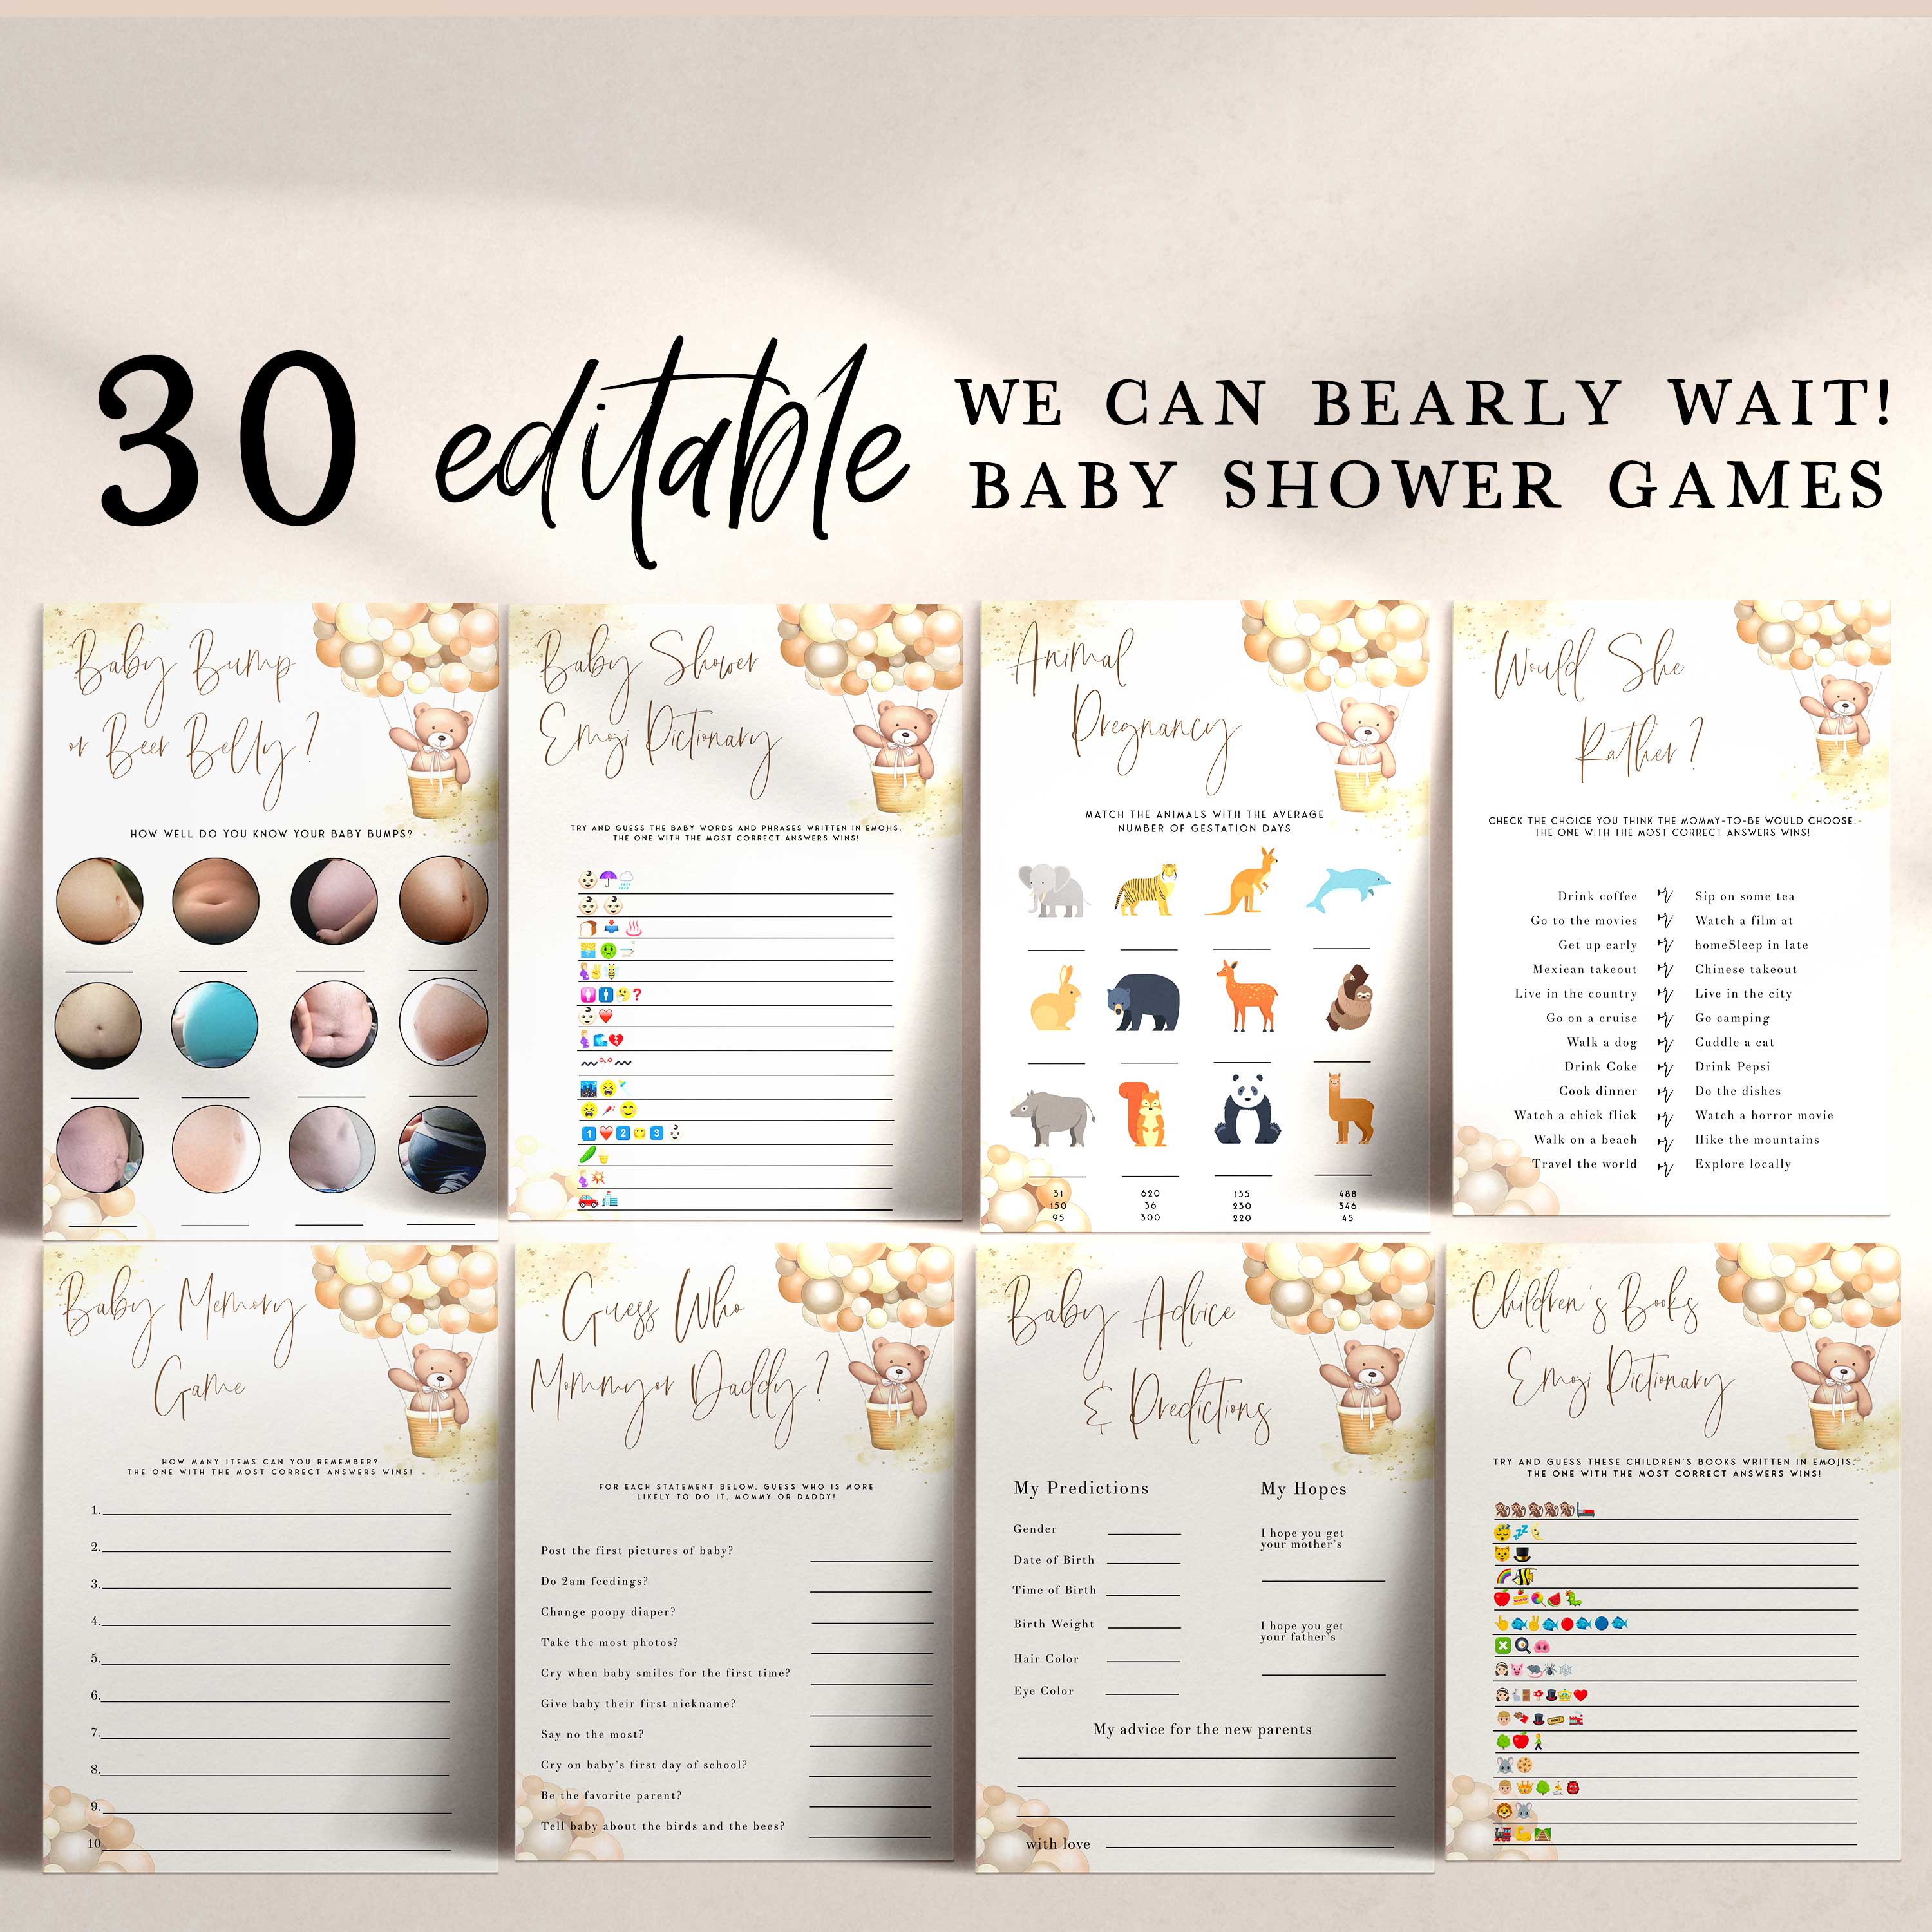 30 editable baby shower games, printable baby shower games, we can bearly wait baby showers, best baby games, popular baby shower games, teddy bear baby shower